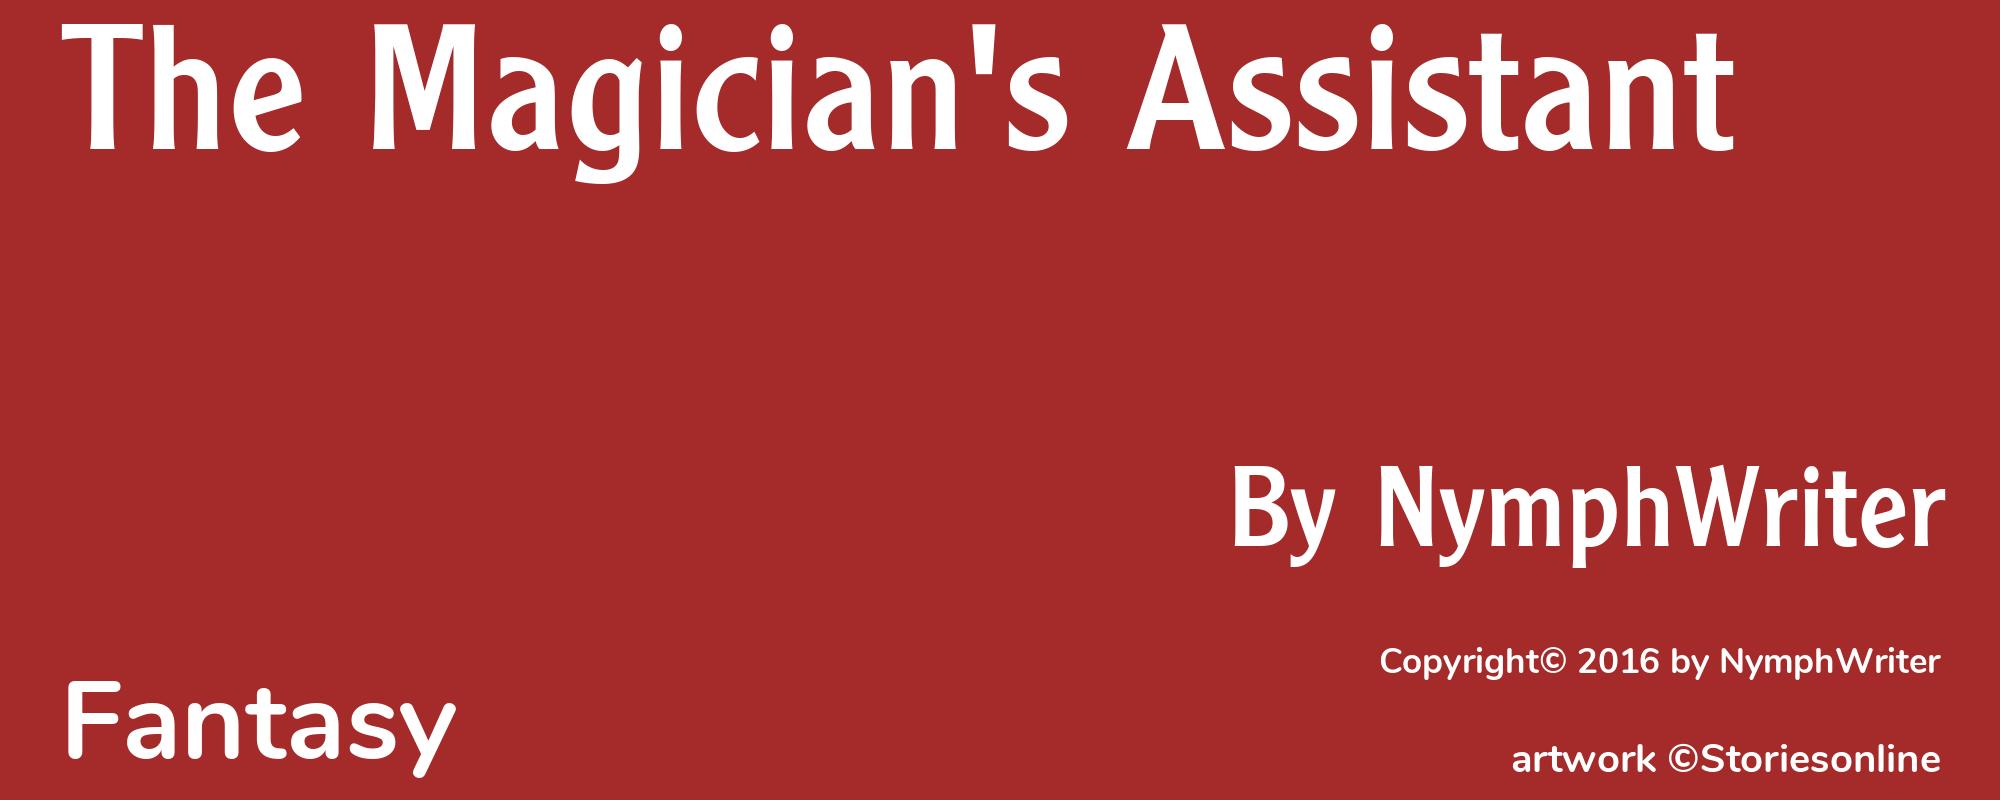 The Magician's Assistant - Cover